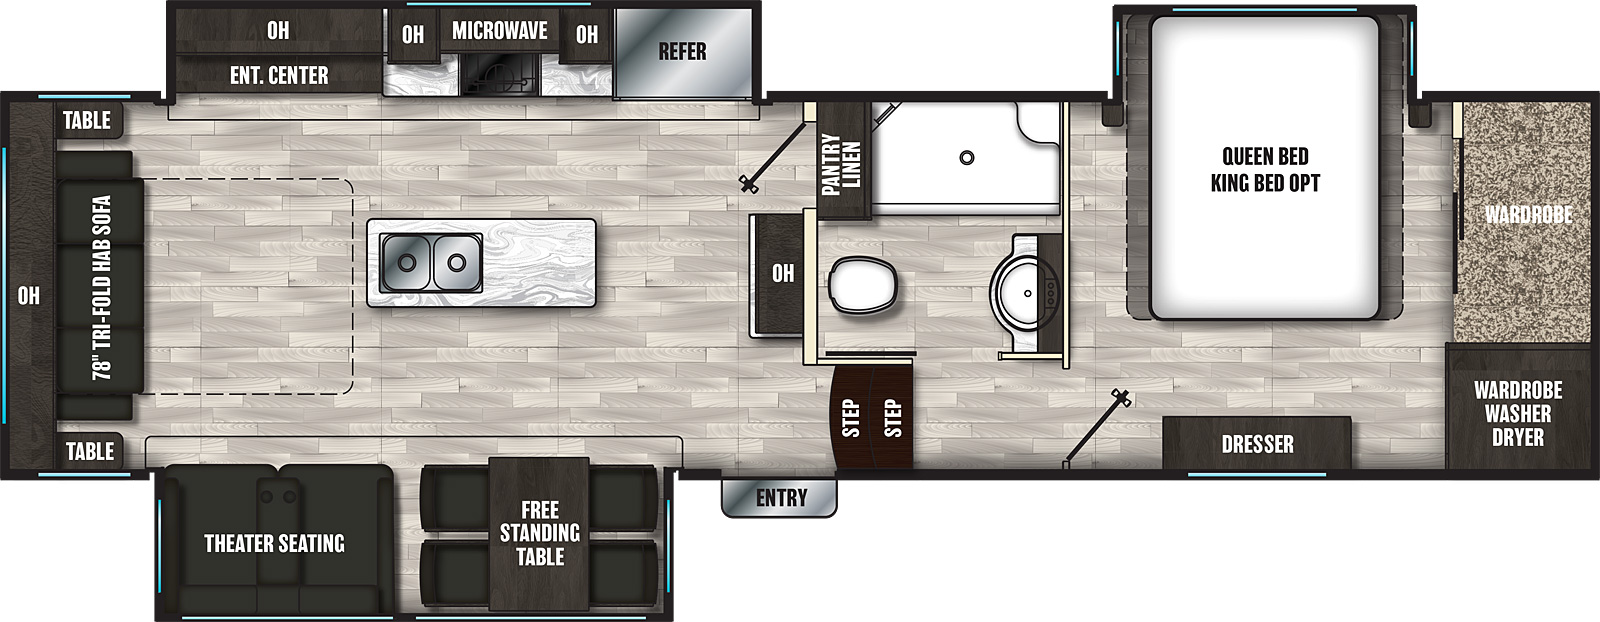 The 290RL has three slide outs and one entry. Interior layout front to back: front bedroom with off-door side queen bed slideout, front wardrobe with washer and dryer, and door side dresser; off-door side full bathroom; overhead cabinet and pantry/linen closet along inner wall; door side slide out containing free standing table, and theater seating; off-door side slide out containing refrigerator, kitchen counter, microwave, overhead cabinets, and entertainment center with overhead cabinet; kitchen island with sink; and rear tri-fold hide-a-bed sofa with side tables and overhead cabinet.